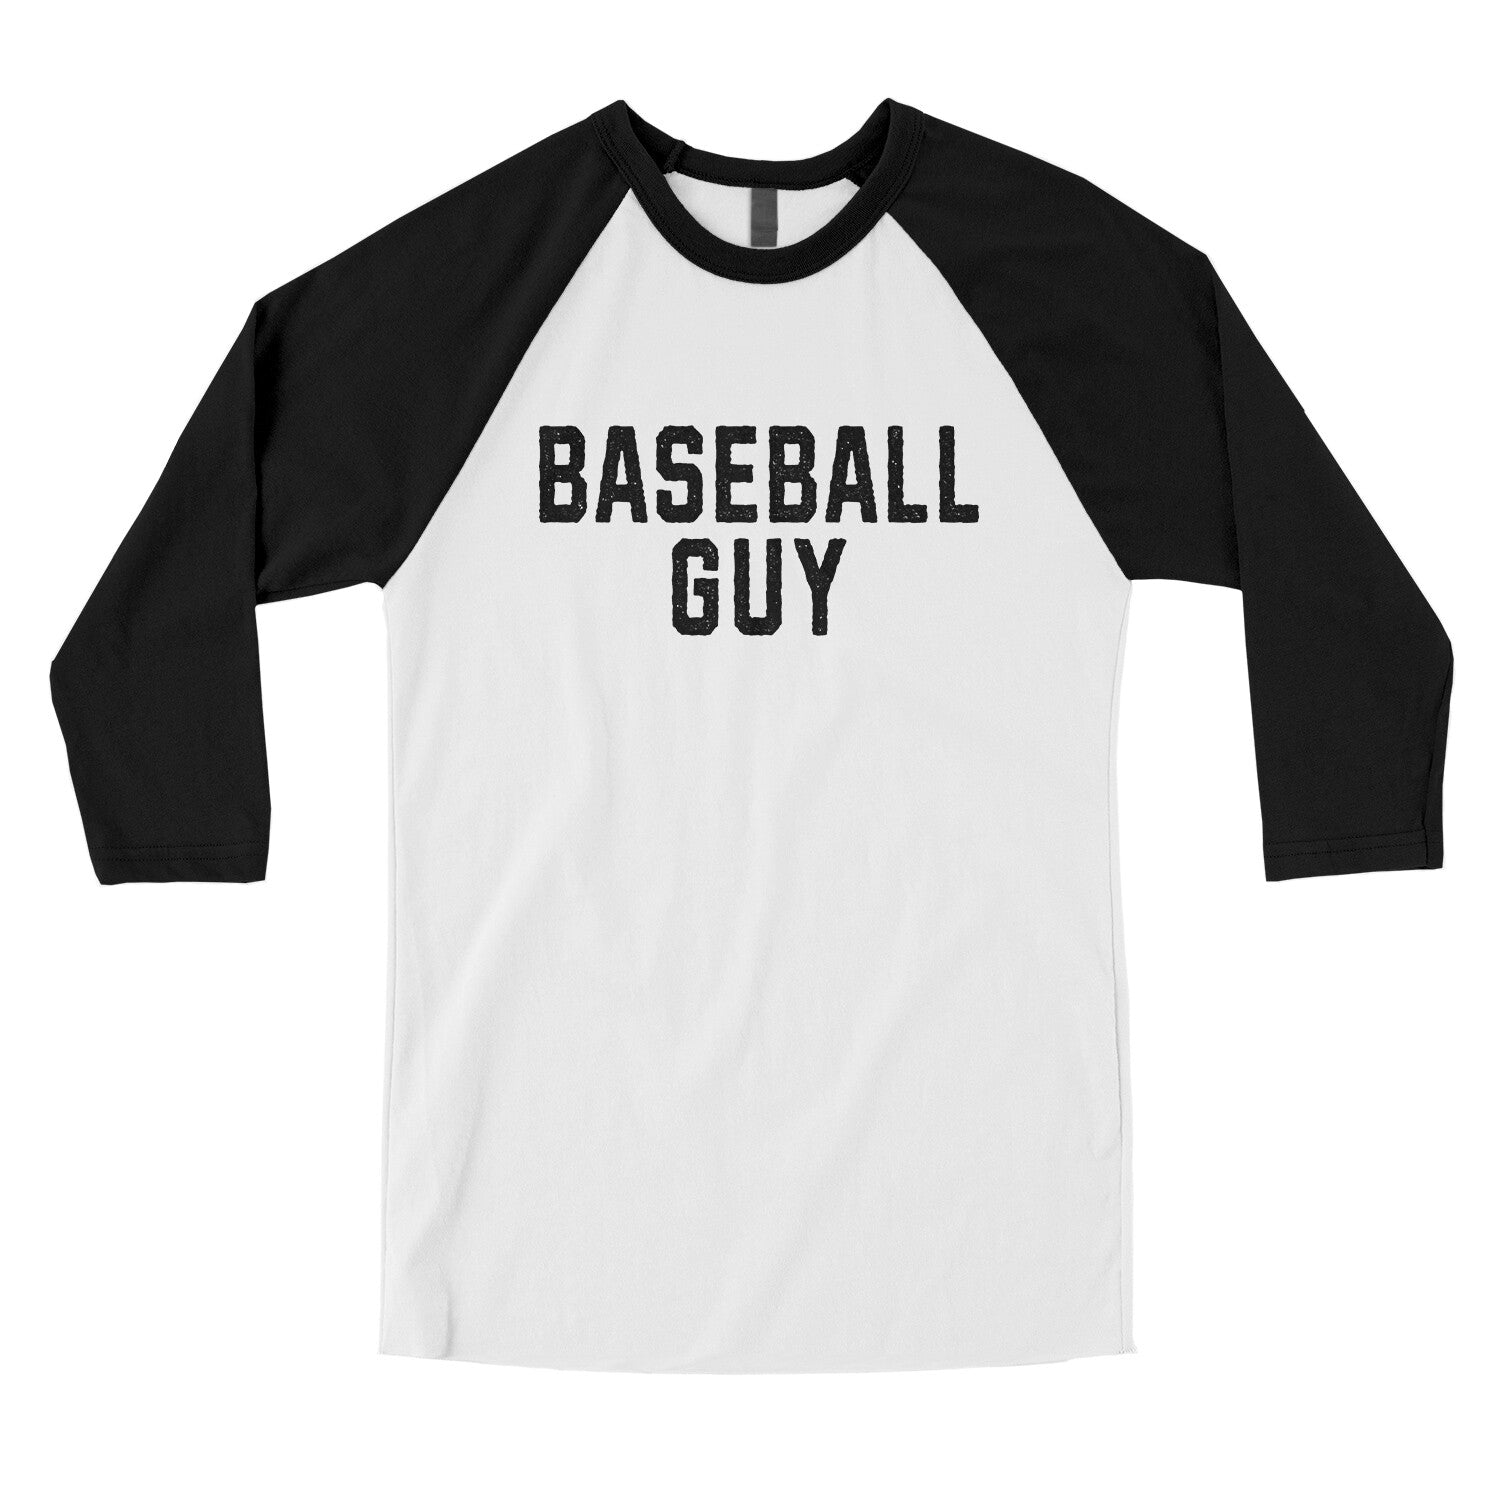 Baseball Guy in White with Black Color